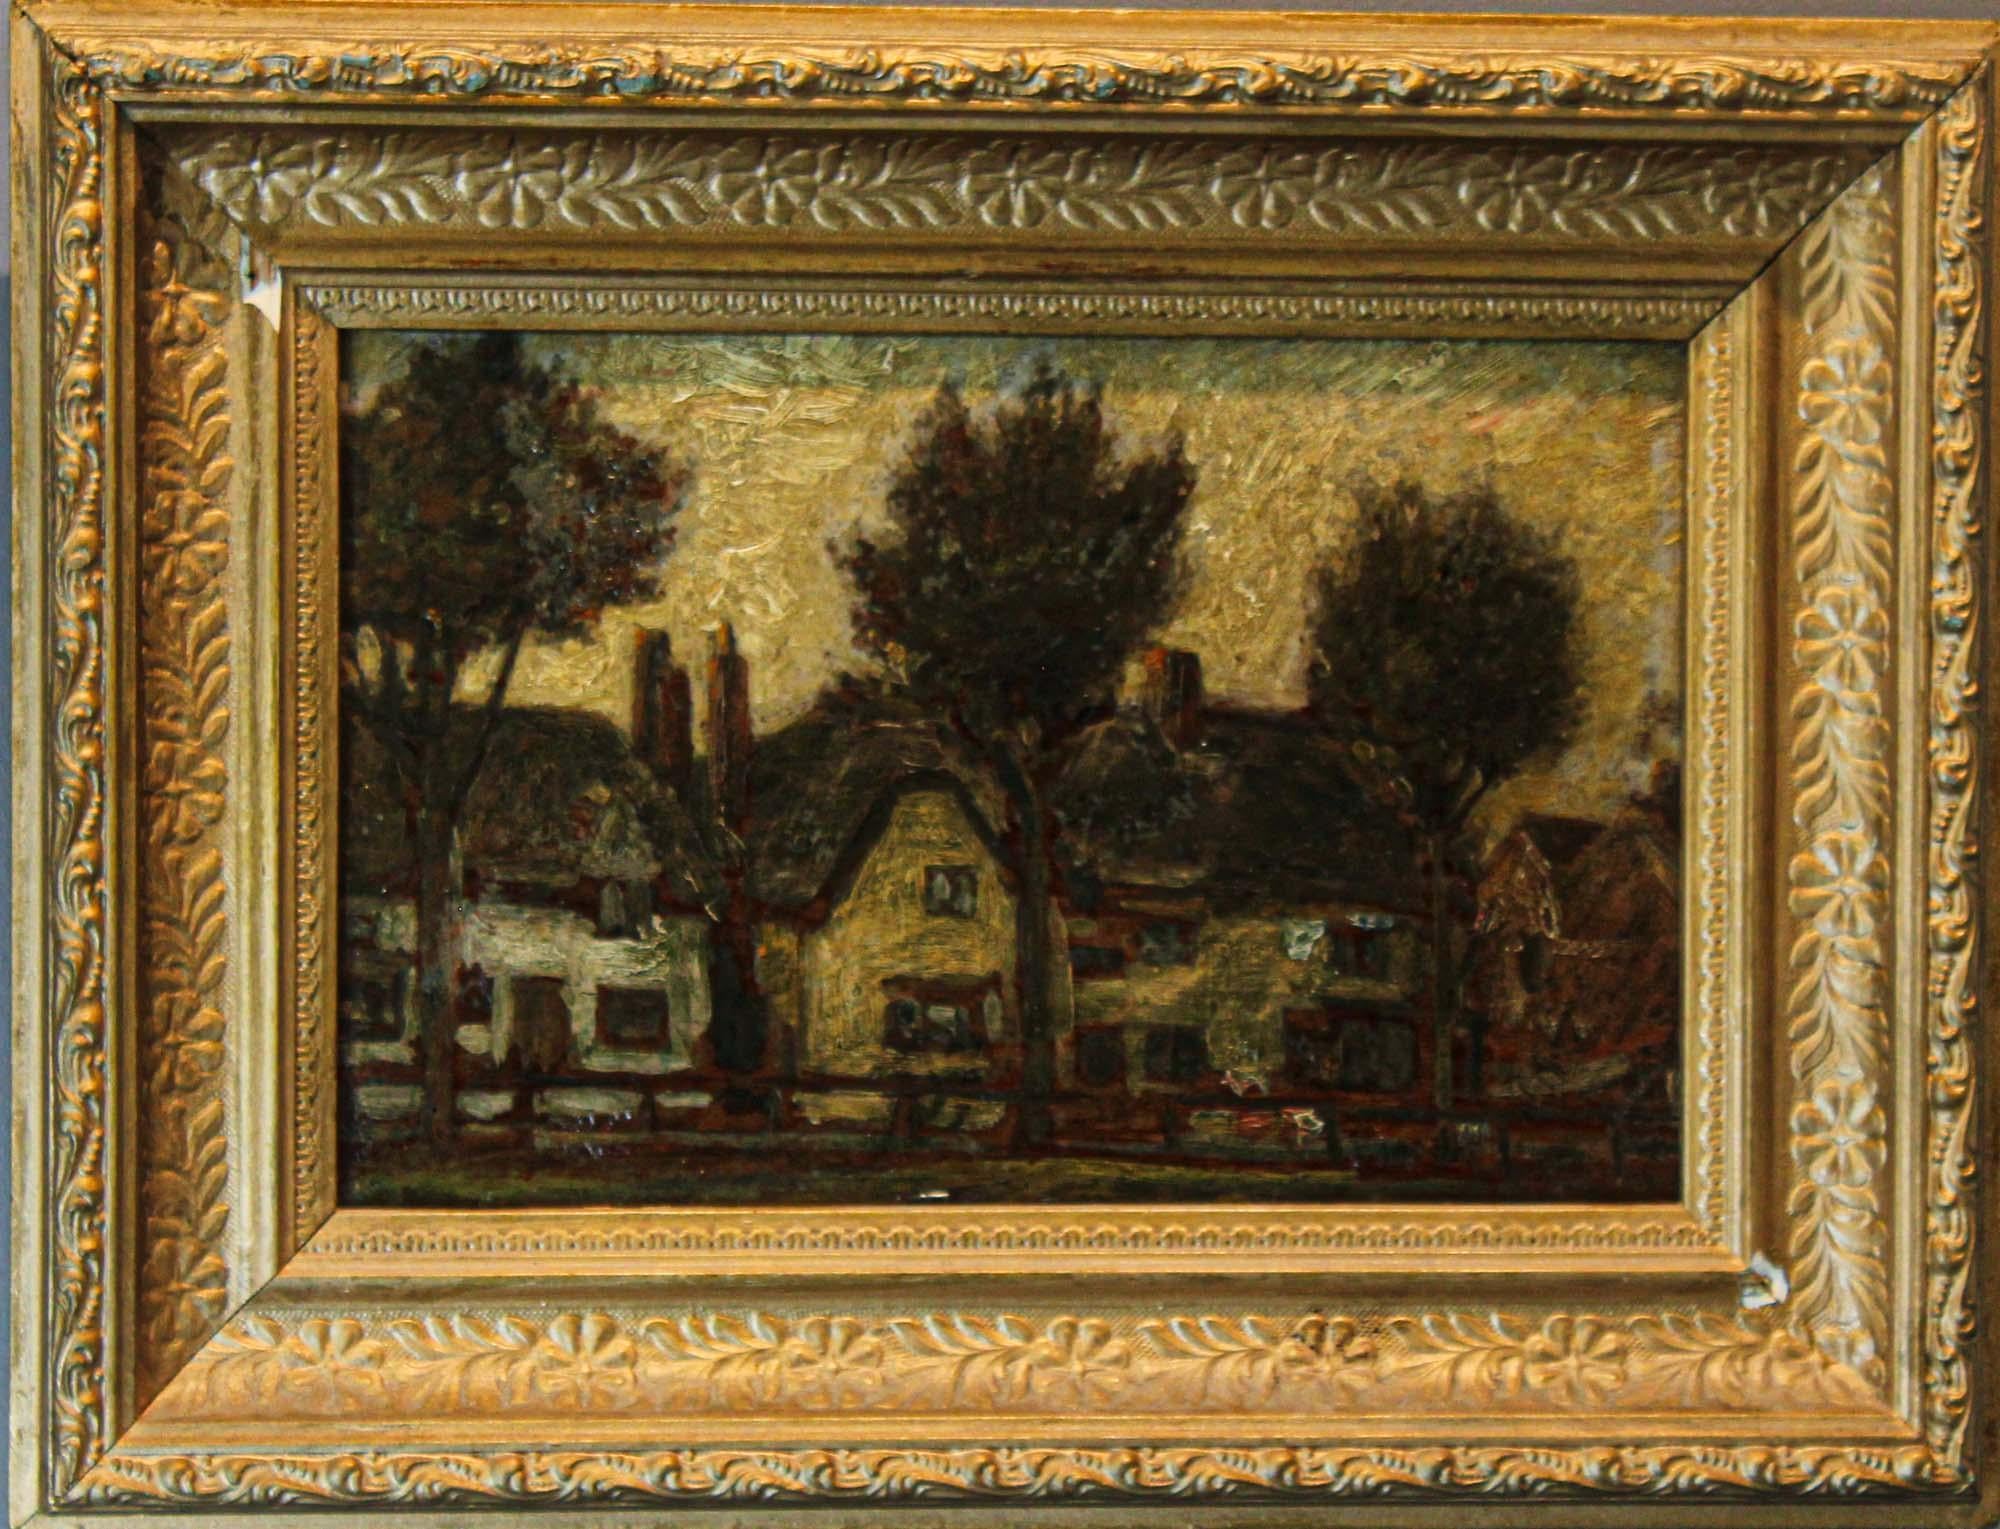 20th century unknown artist oil on panel painting - landscape

Dimensions:

Picture size: 28.5 x 19 cm ( width x length)
Full frame size: 42 x 32 x 3.5 cm

Approx weight: 1 KG

Condition: Painting has age related wear and tear, frame has